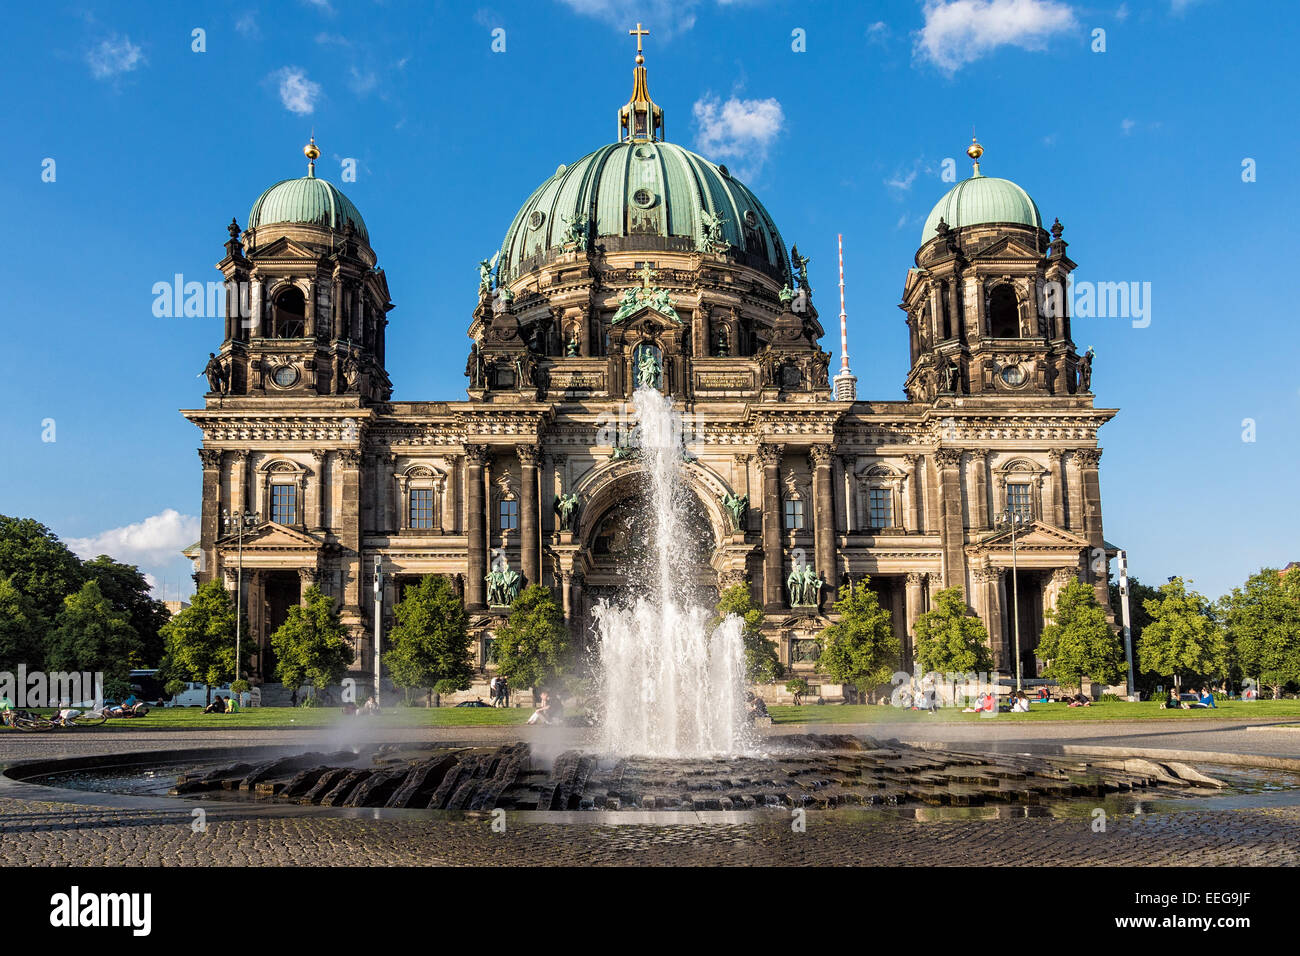 The Dome in Berlin in Germany Stock Photo